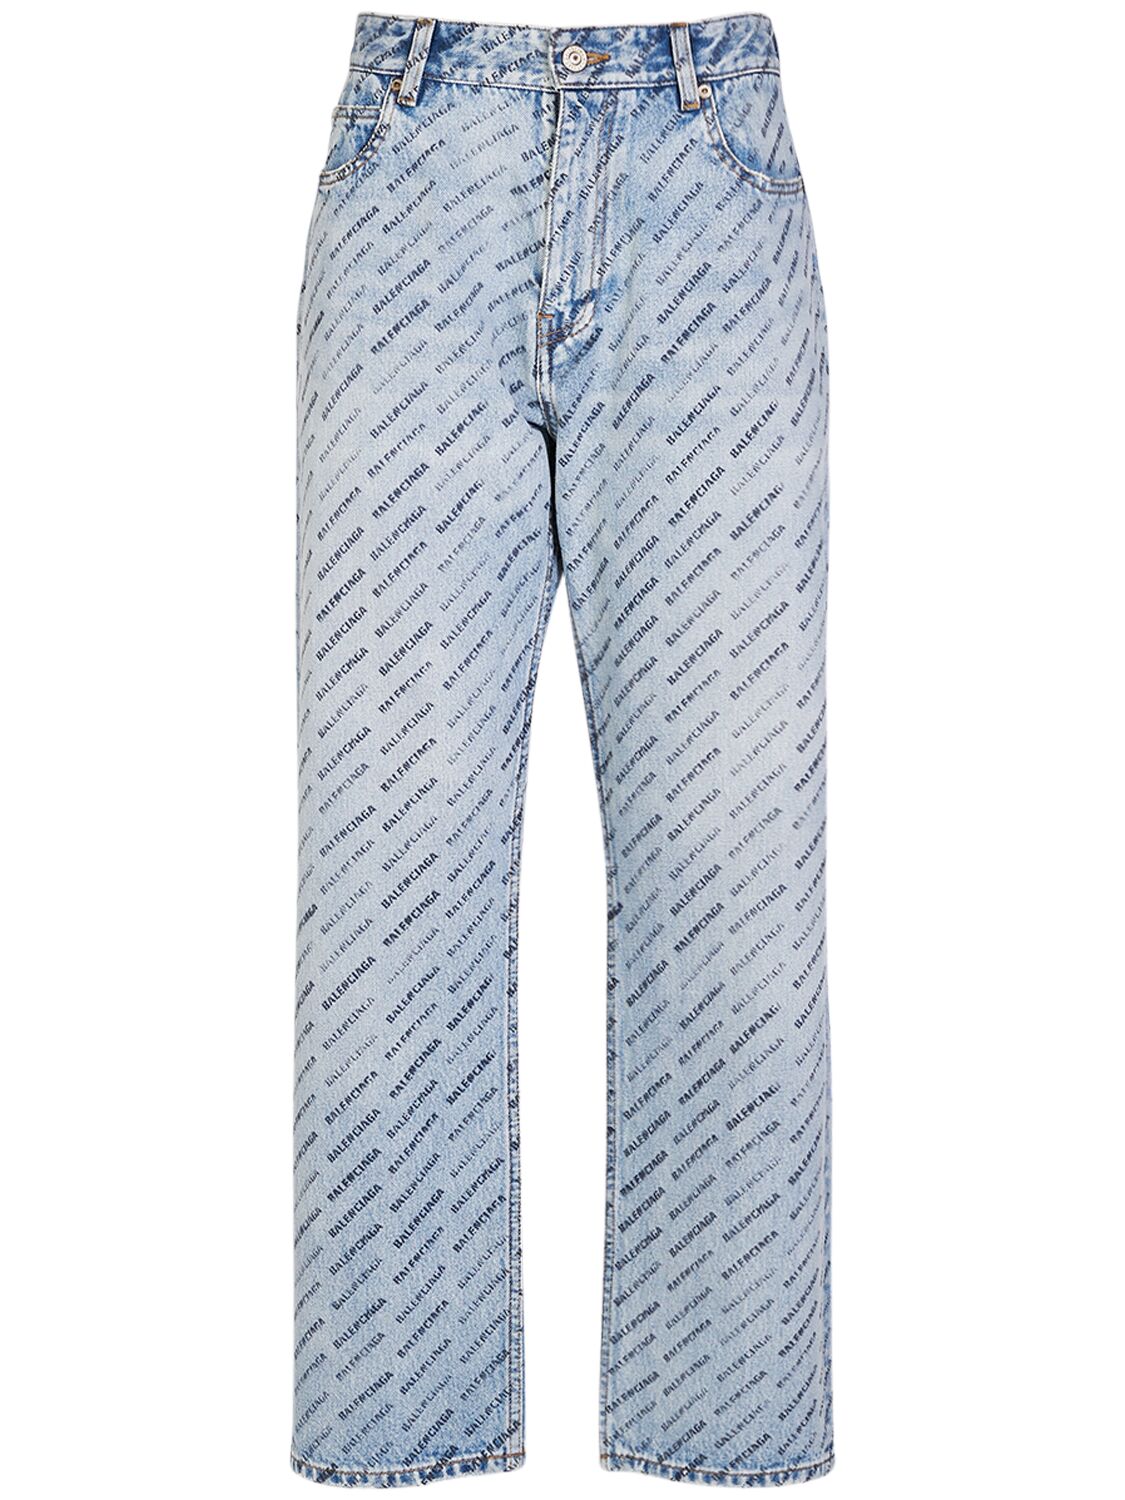 Balenciaga Buckle Loose Fit Denim Jeans In Iced Blue